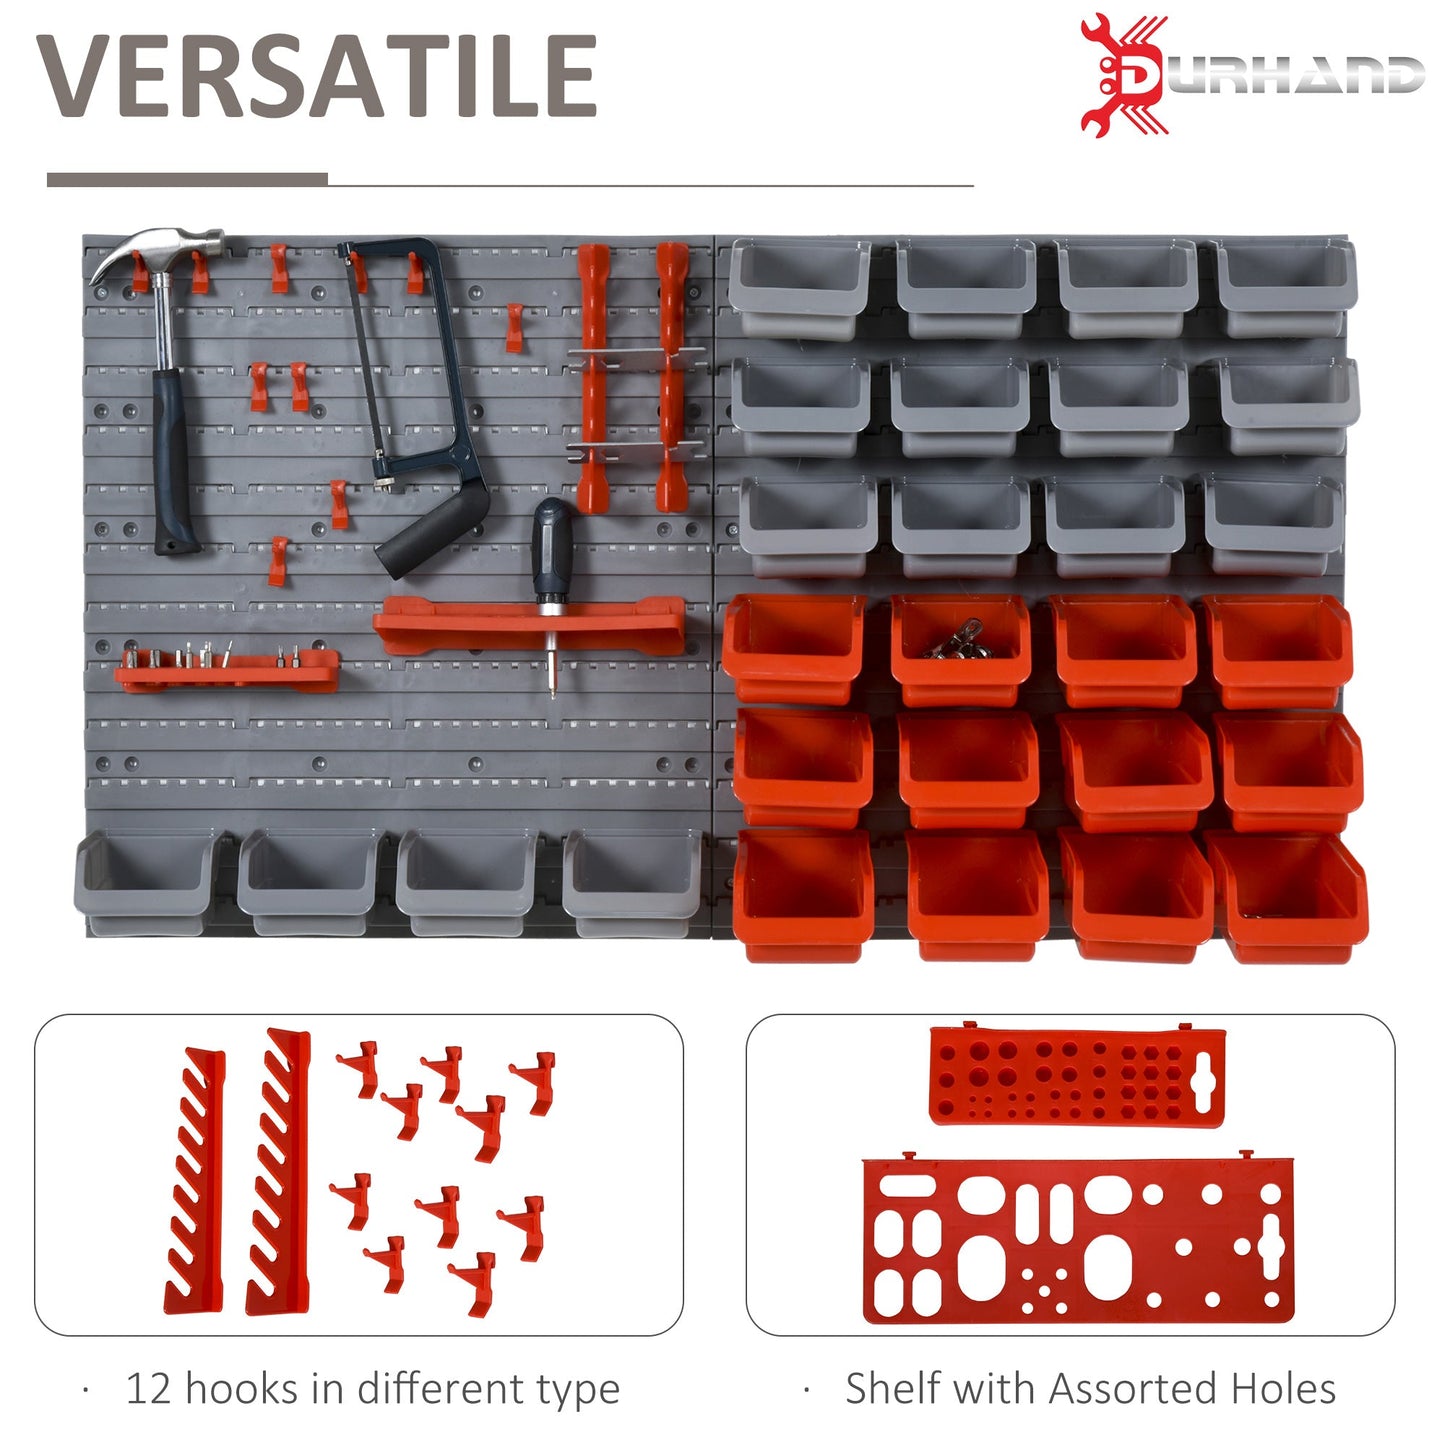 44PC Wall Mounted Storage Bins Parts Rack Kit with Storage Bins, Pegboard and Hooks, Garage Plastic Organizer, Red at Gallery Canada